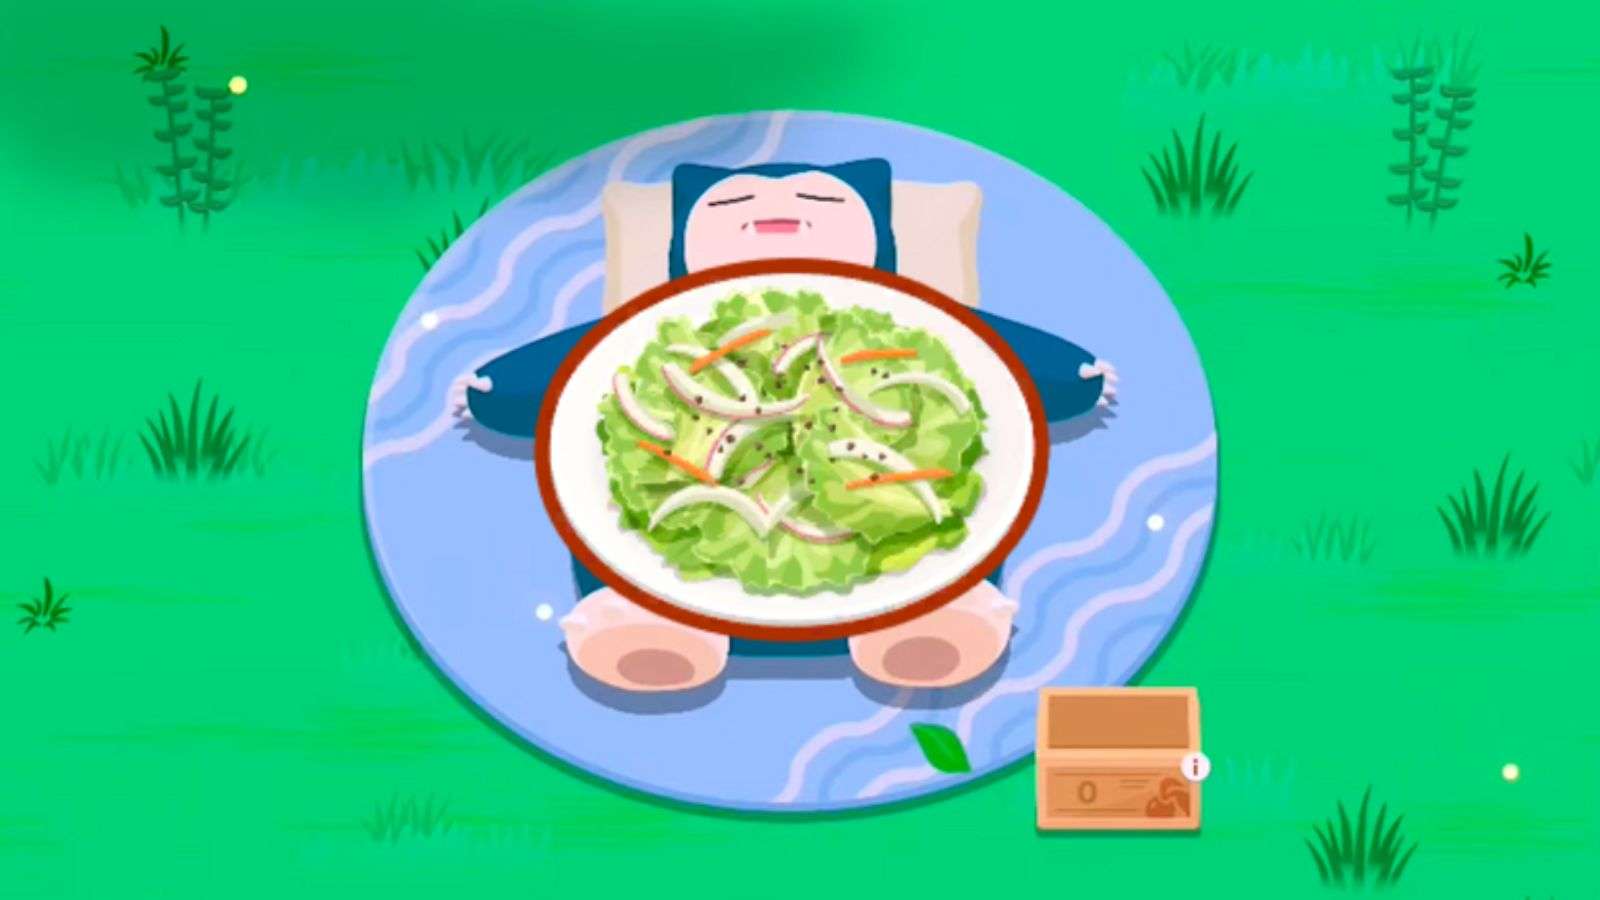 A salad recipe in front of Snorlax in Pokemon Sleep